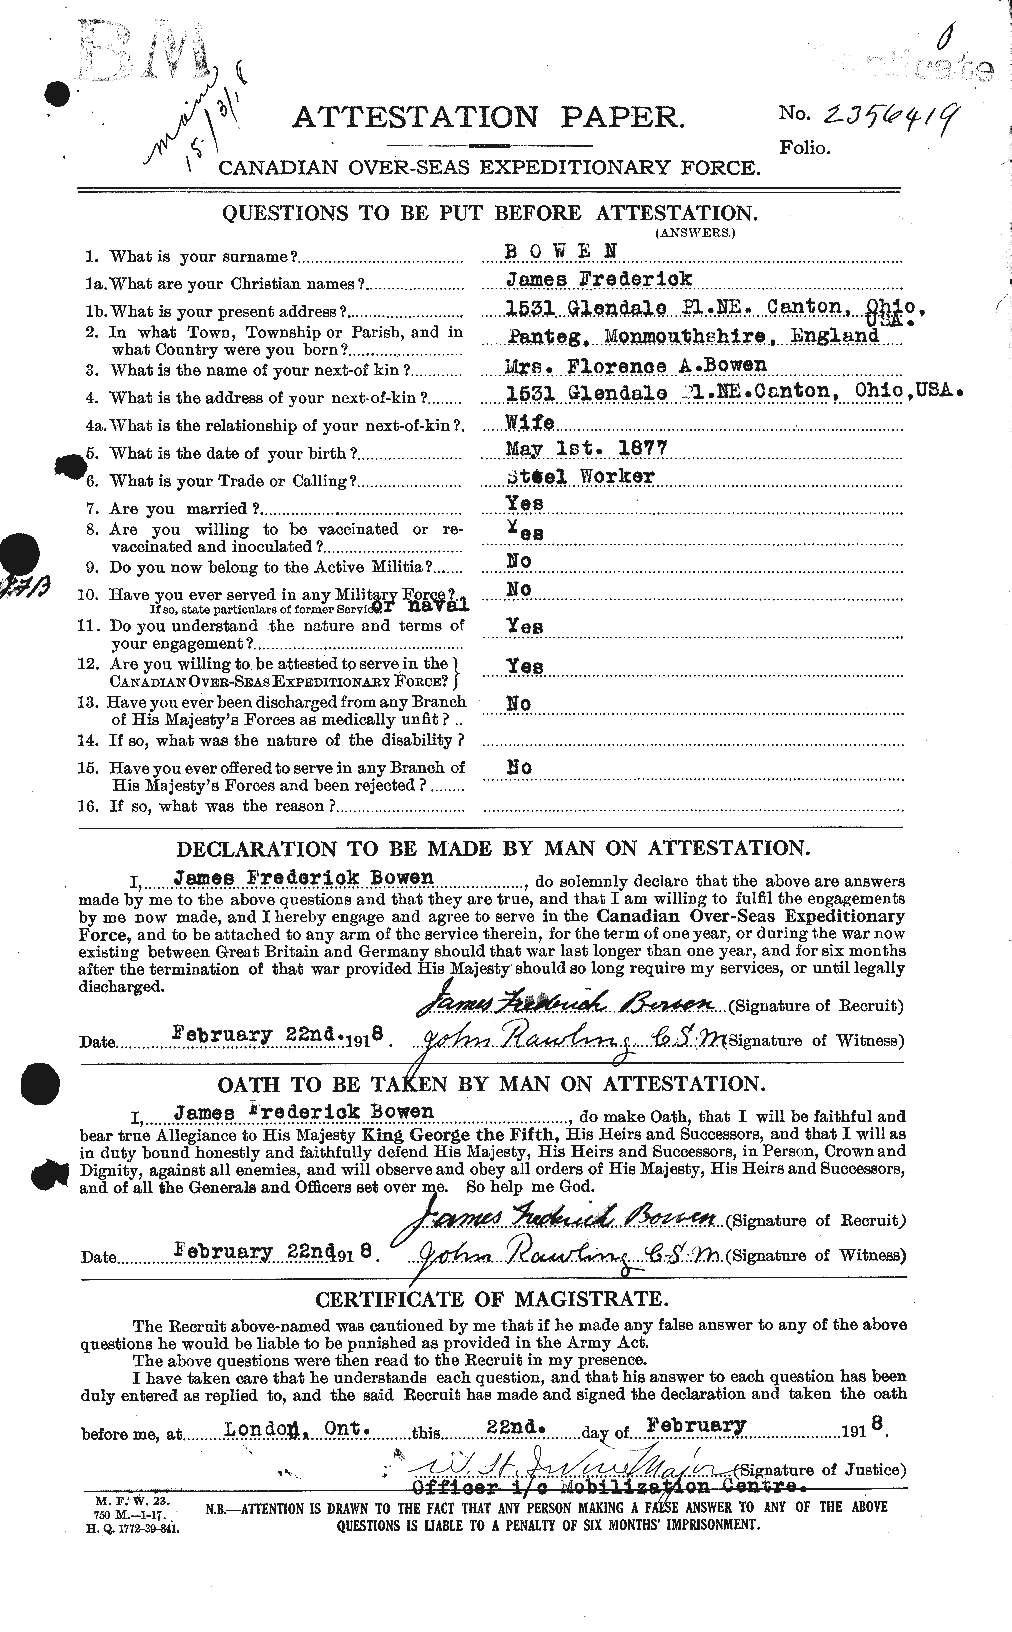 Personnel Records of the First World War - CEF 255427a